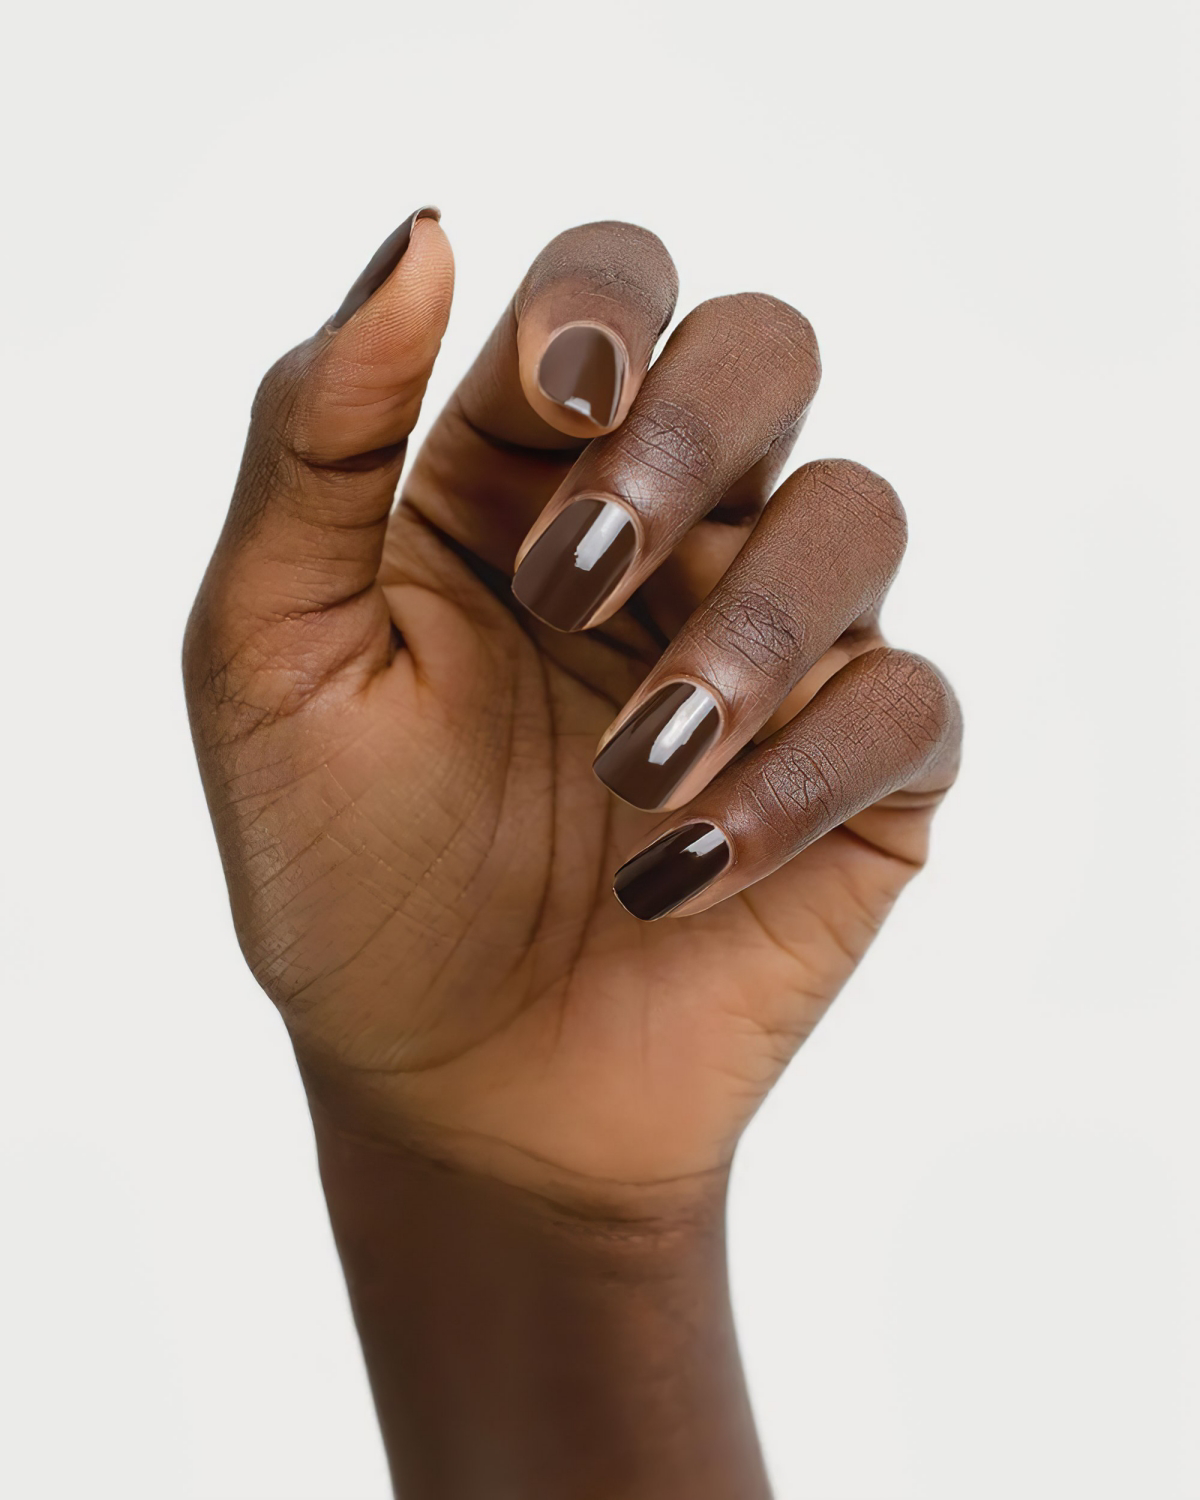 pretty nail colors for brown skin